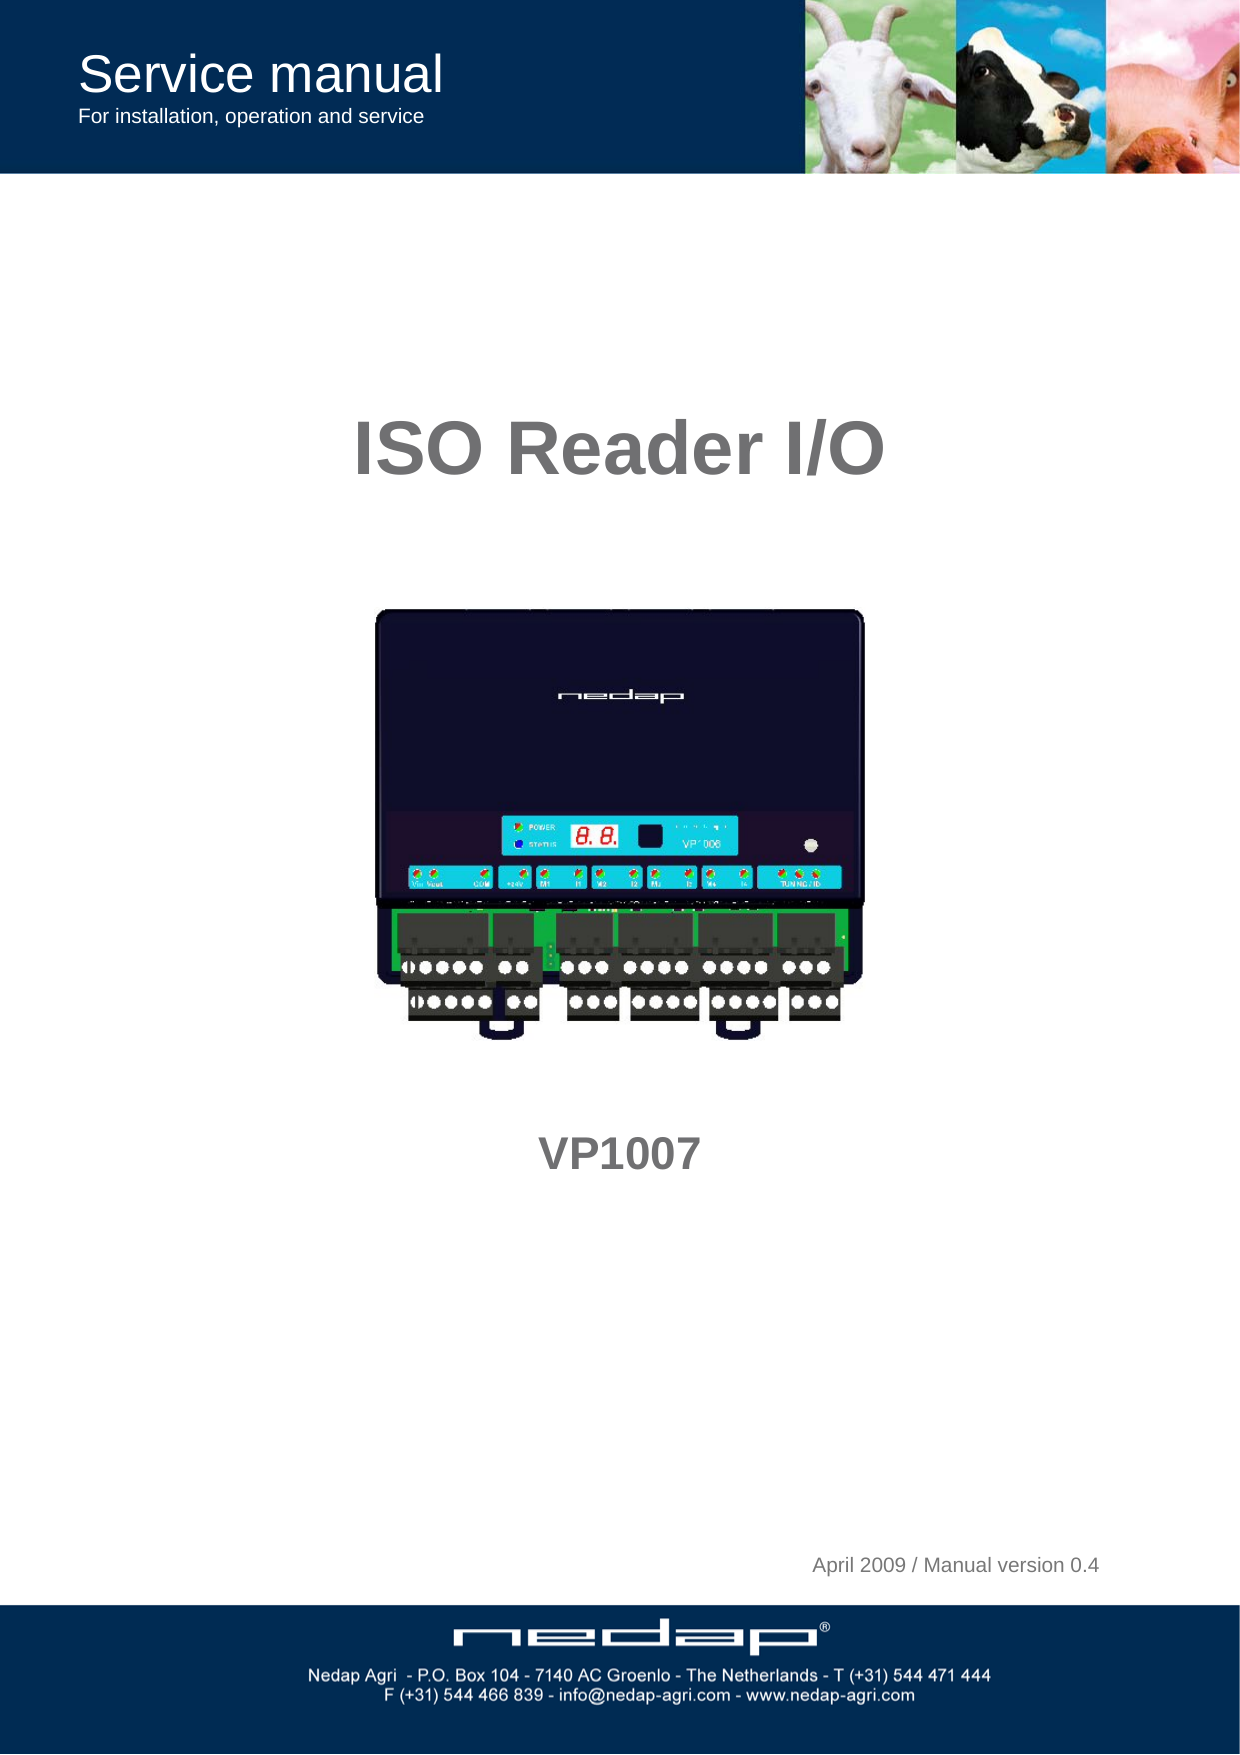 Service manual For installation, operation and service   ISO Reader I/O      VP1007                   April 2009 / Manual version 0.4 